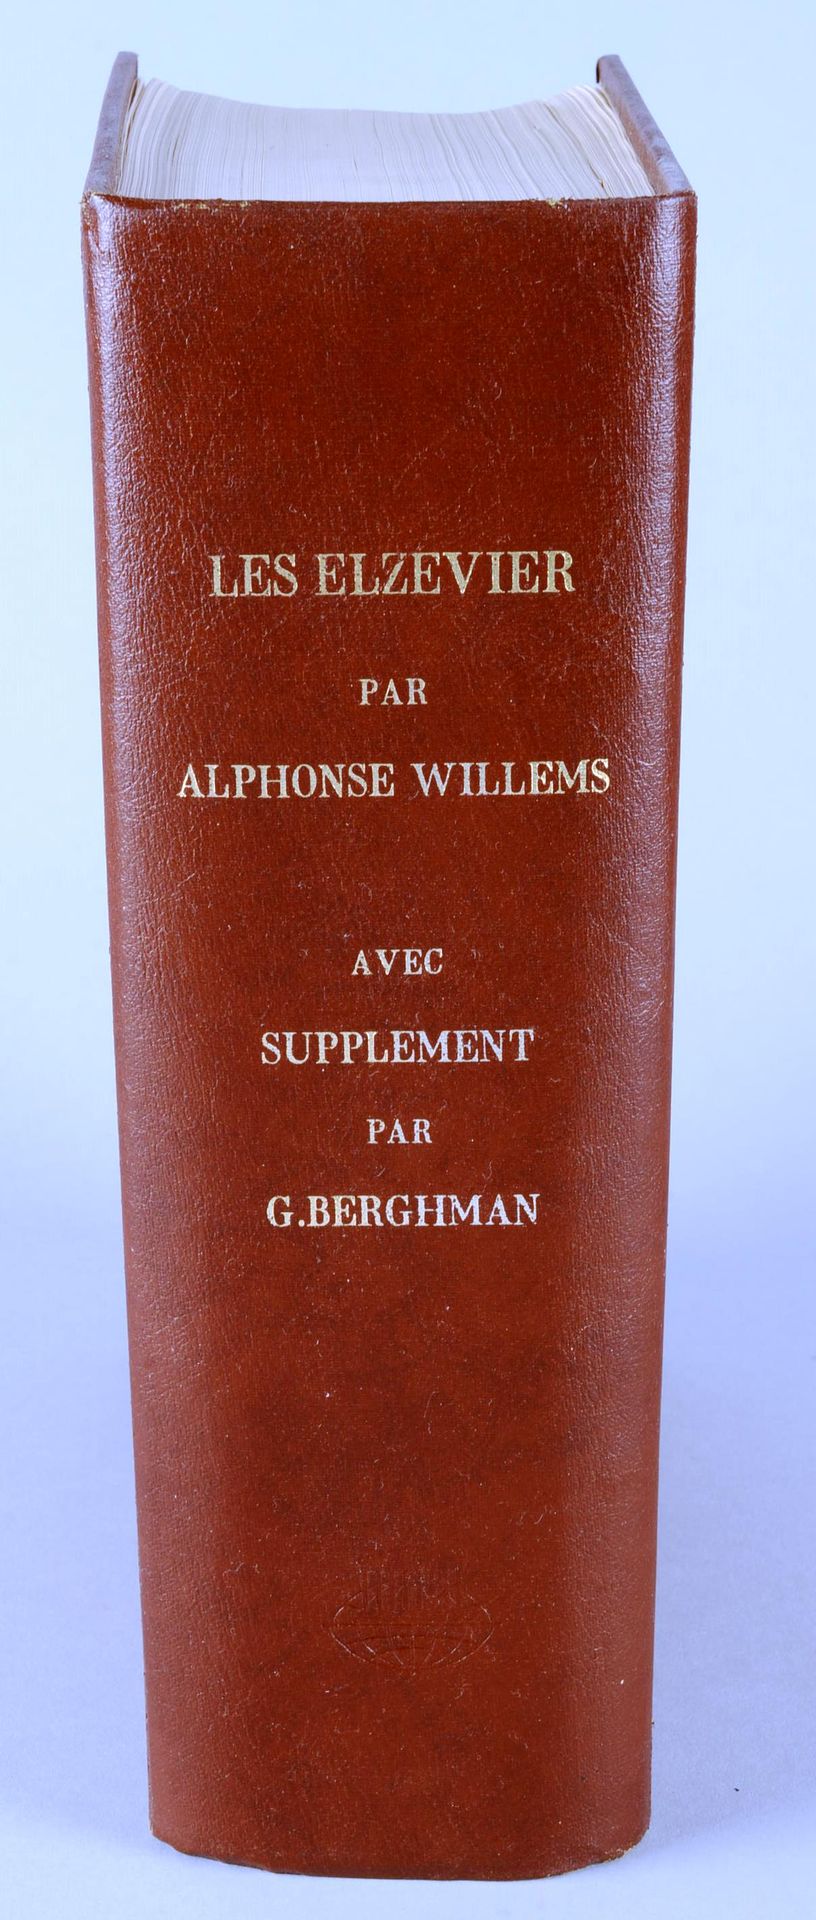 WILLEMS Alphonse WILLEMS Alphonse



Les Elzevier - Historia y anales tipográfic&hellip;